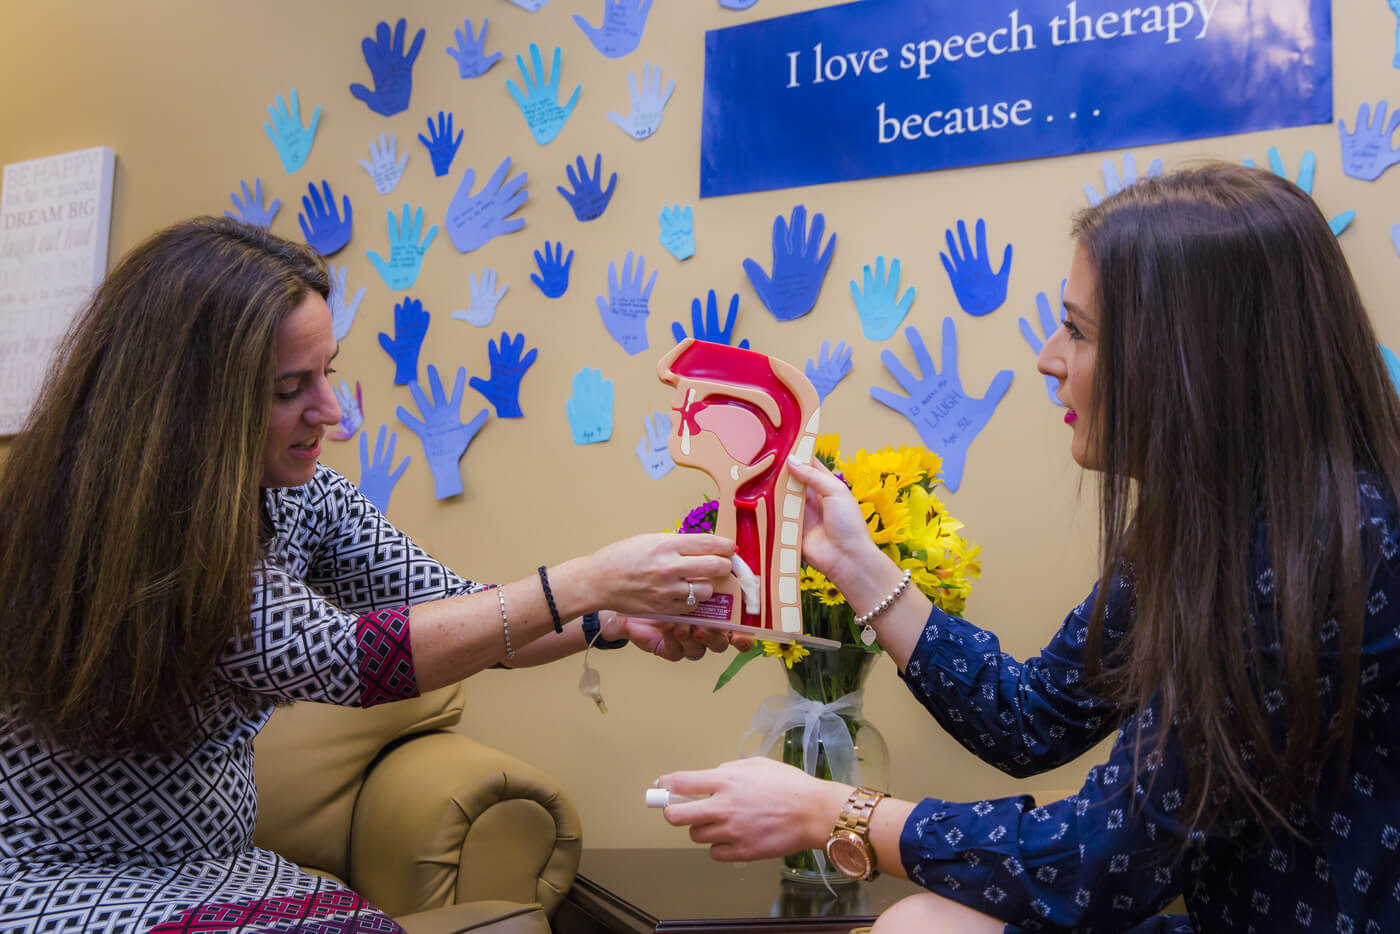 Students in the speech language pathology program gain an understanding of what causes certain conditions